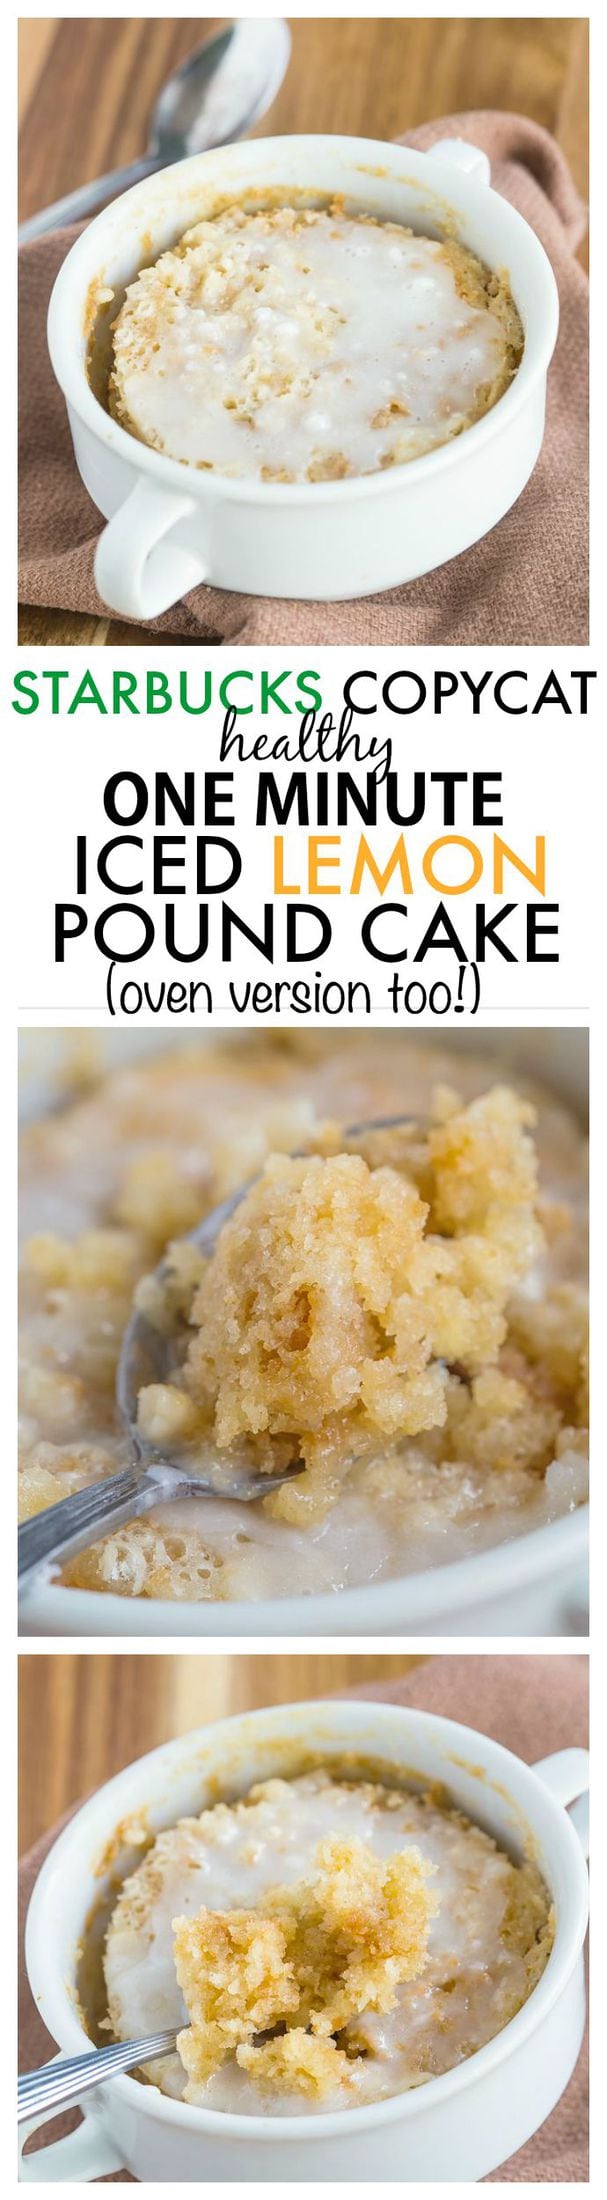 Healthy 1 Minute Iced Lemon Pound Cake {STARBUCKS COPYCAT}- Moist, fluffy and less than 100 calories, this cake takes 1 minute with an oven version too! {vegan, gluten-free + paleo option!}